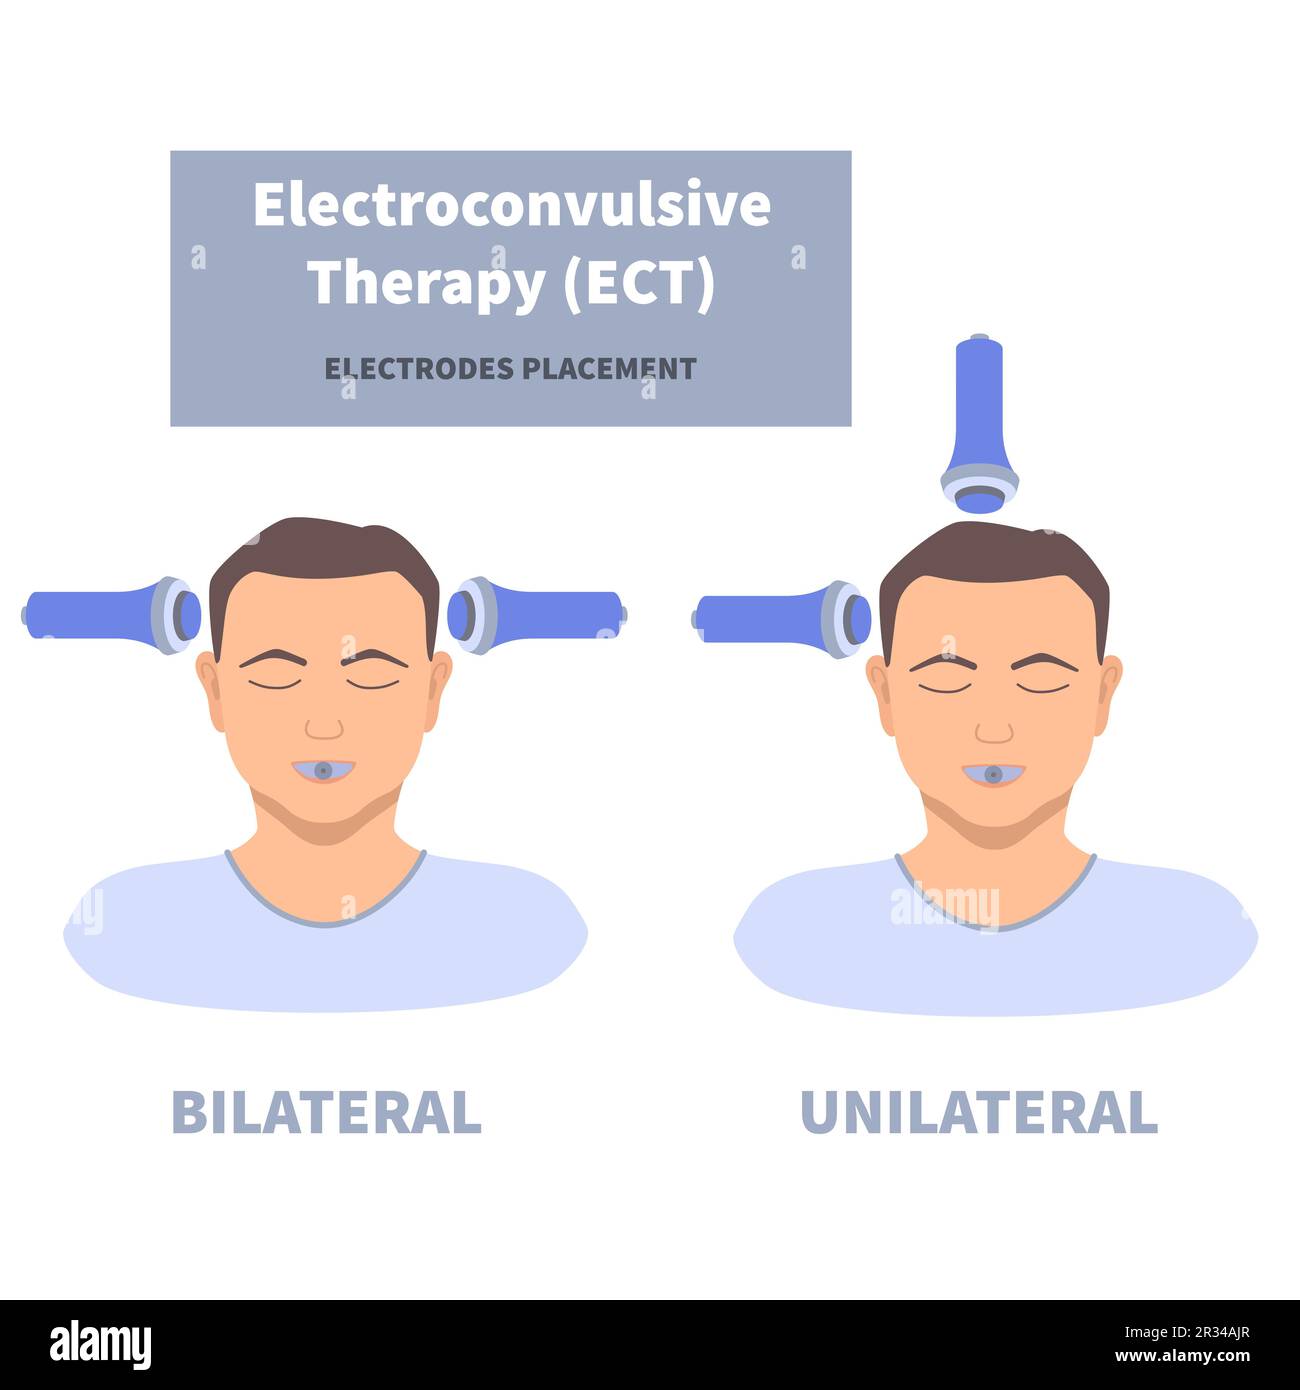 Changing the image problem of electroconvulsive therapy